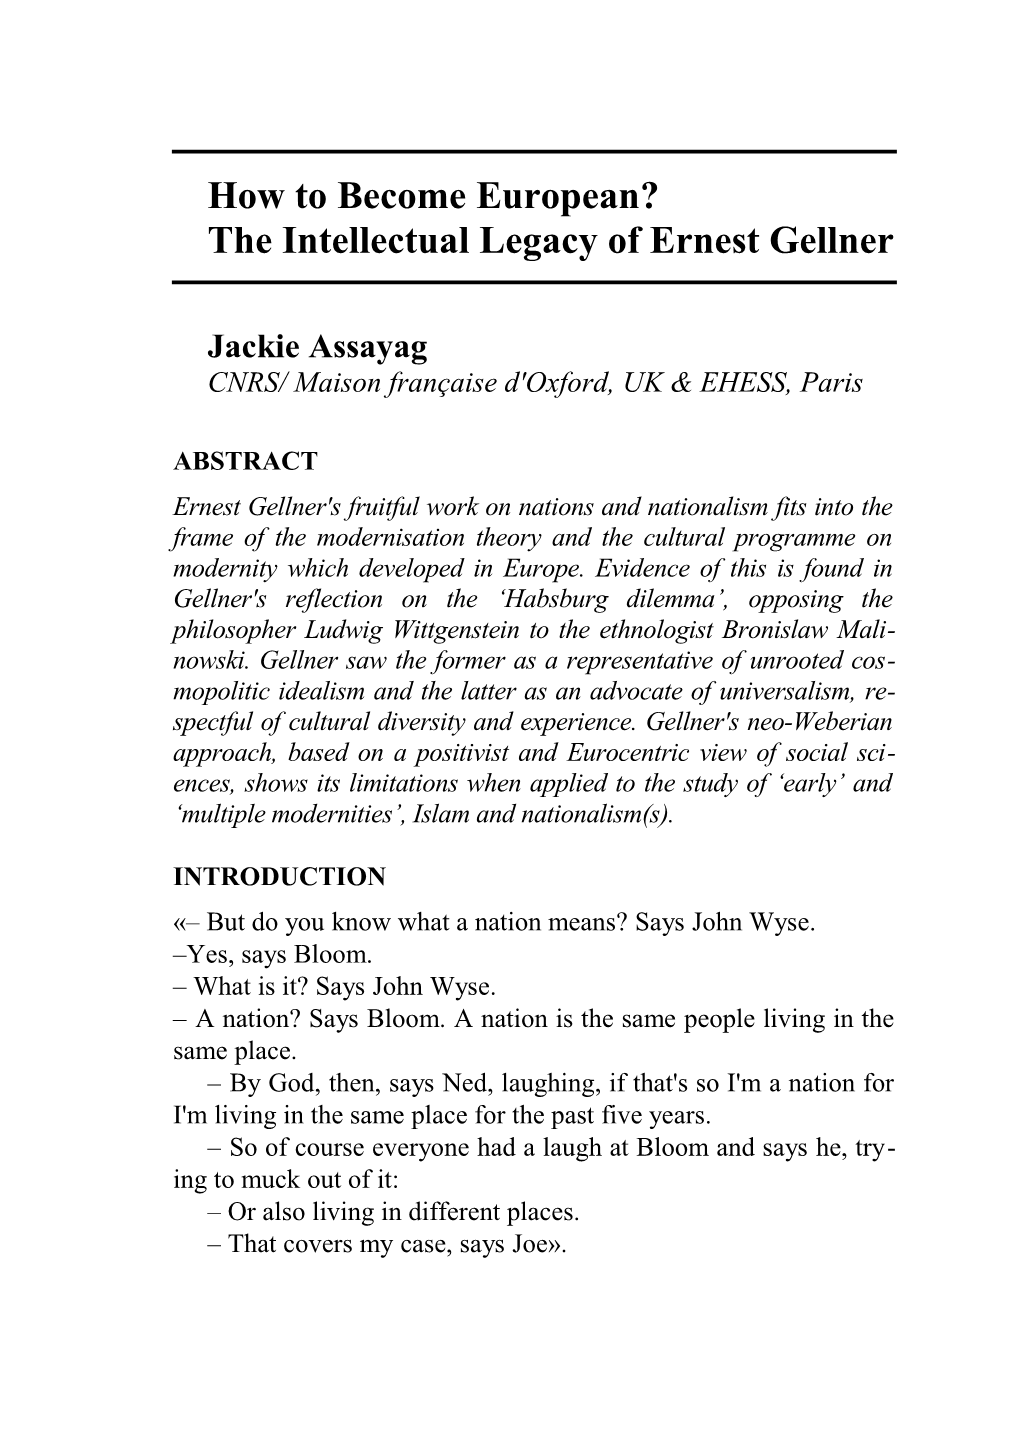 The Intellectual Legacy of Ernest Gellner